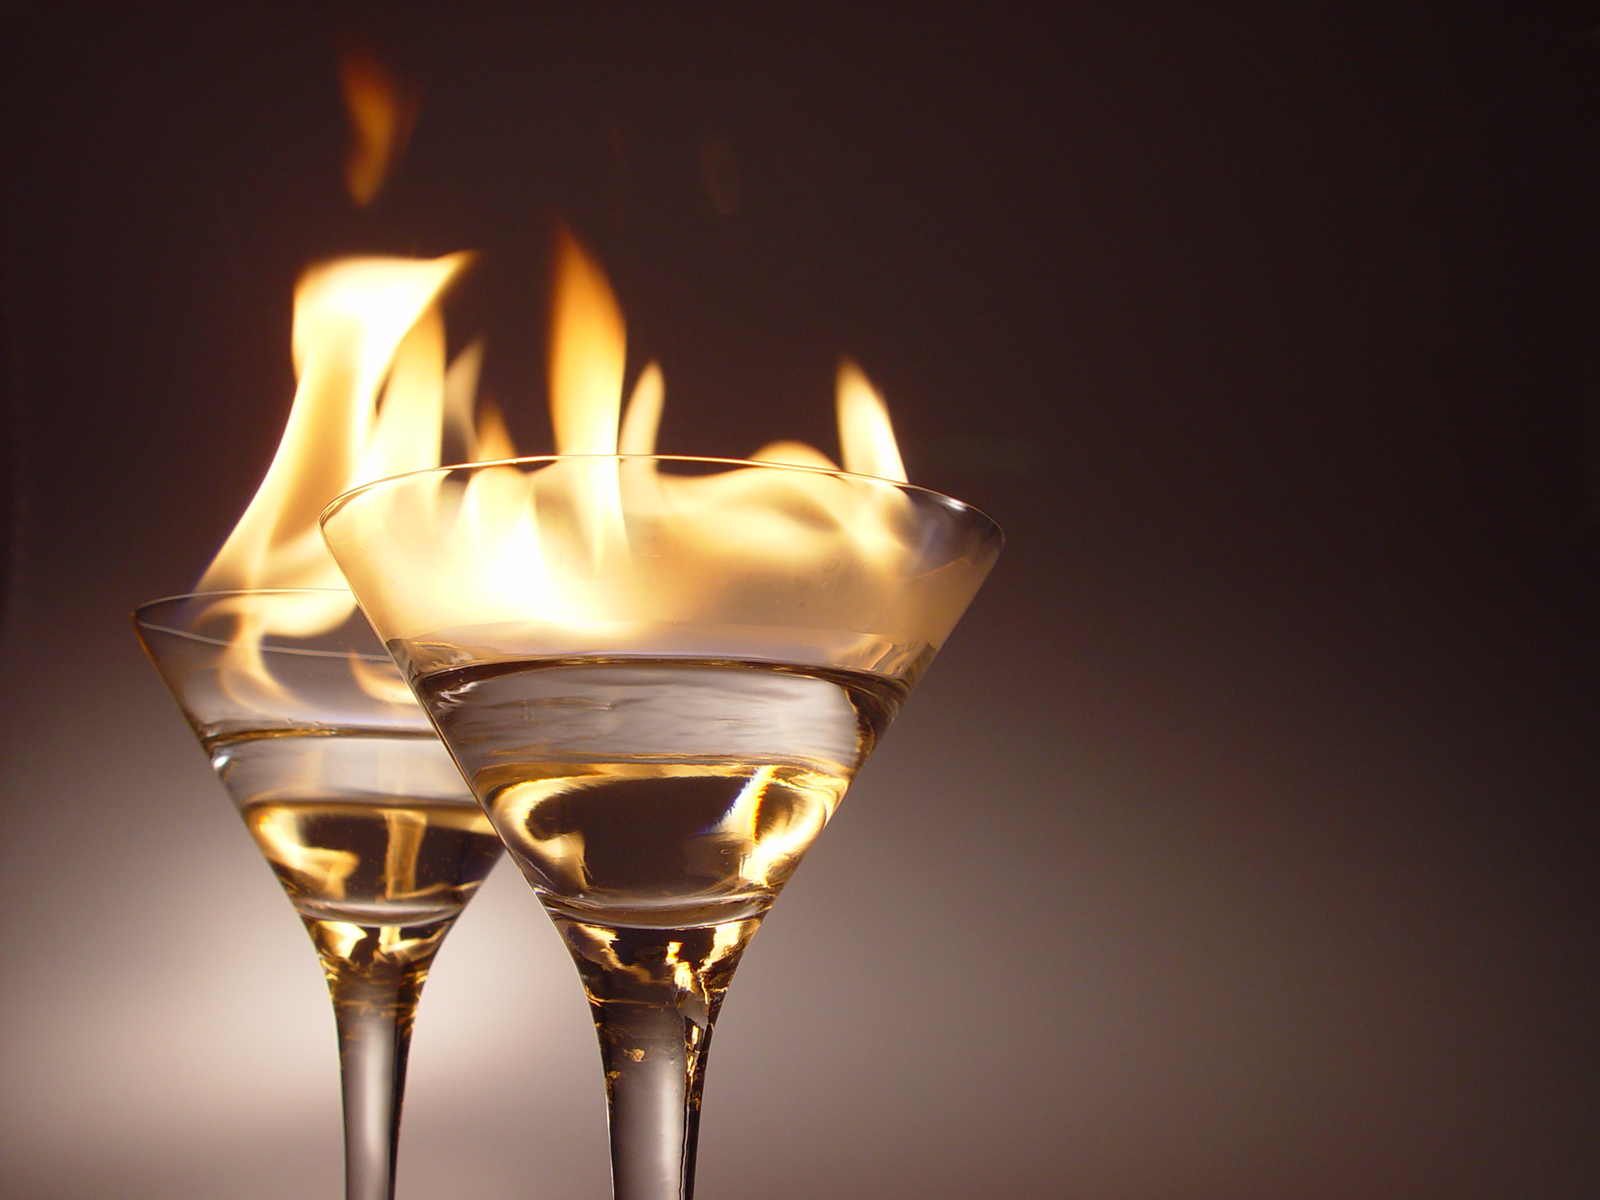 Flaming drink photo